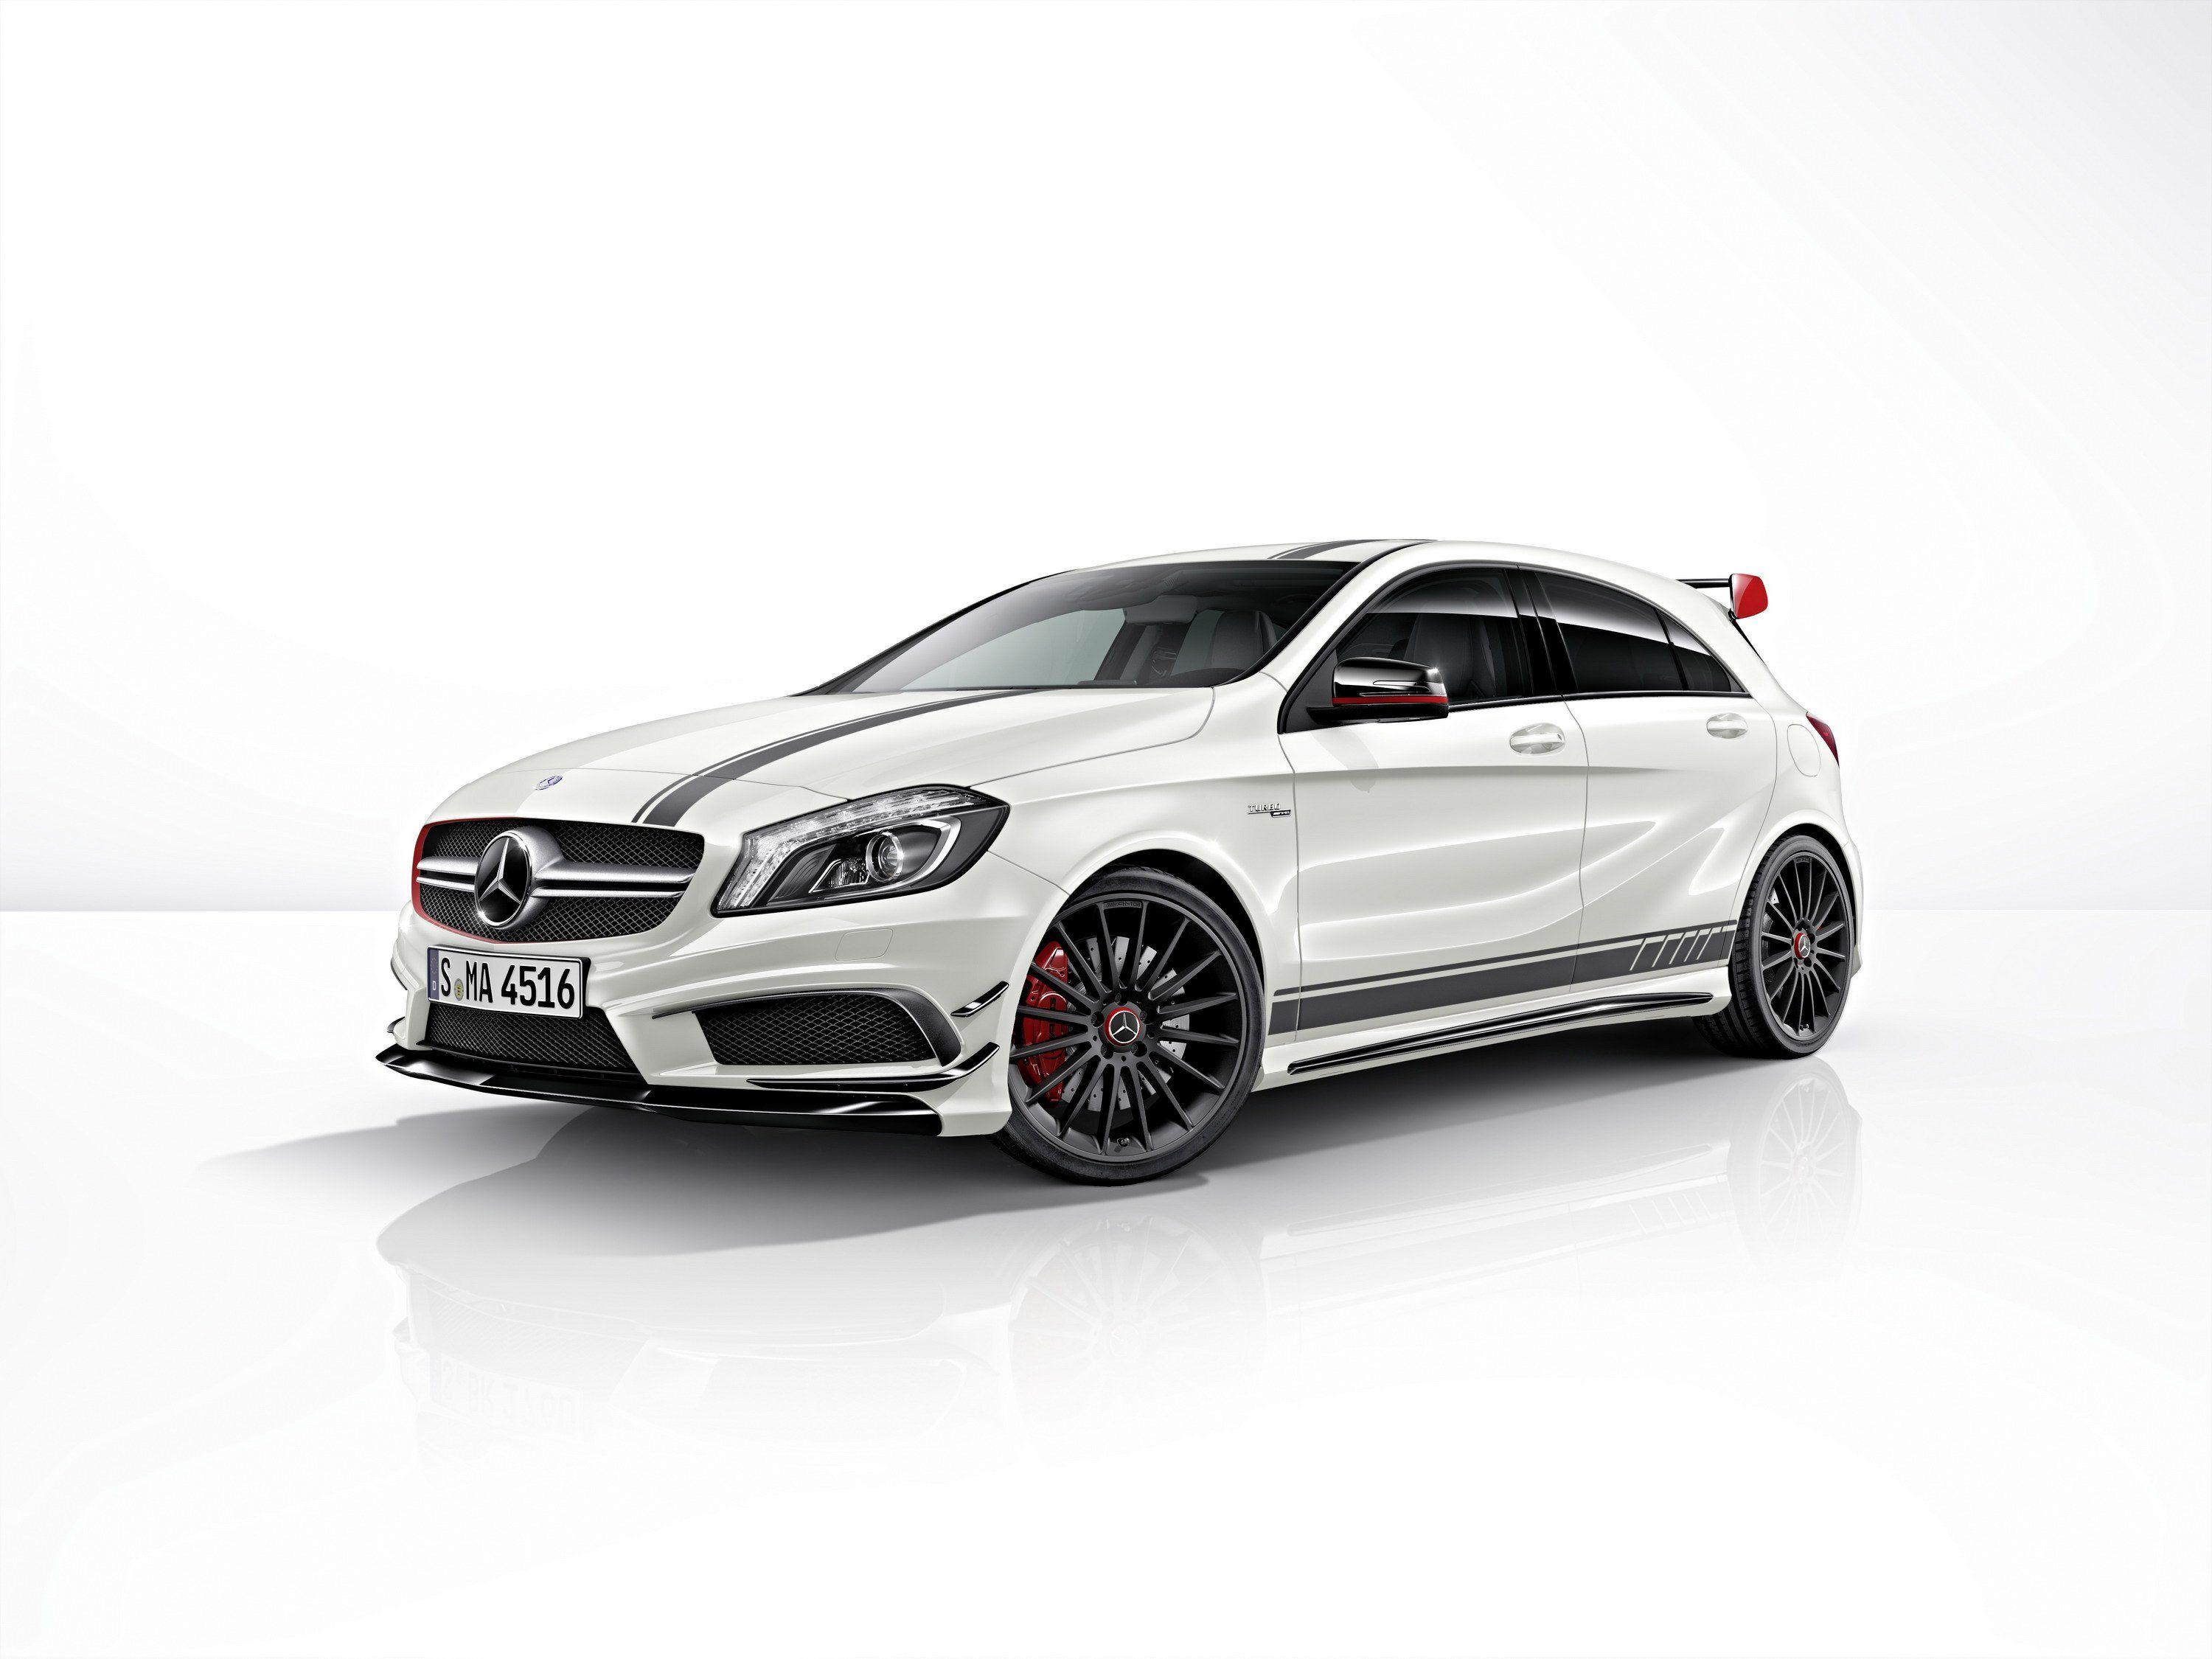 Mercedes A45 AMG Edition 1 Picture, Photo, Wallpaper. Top